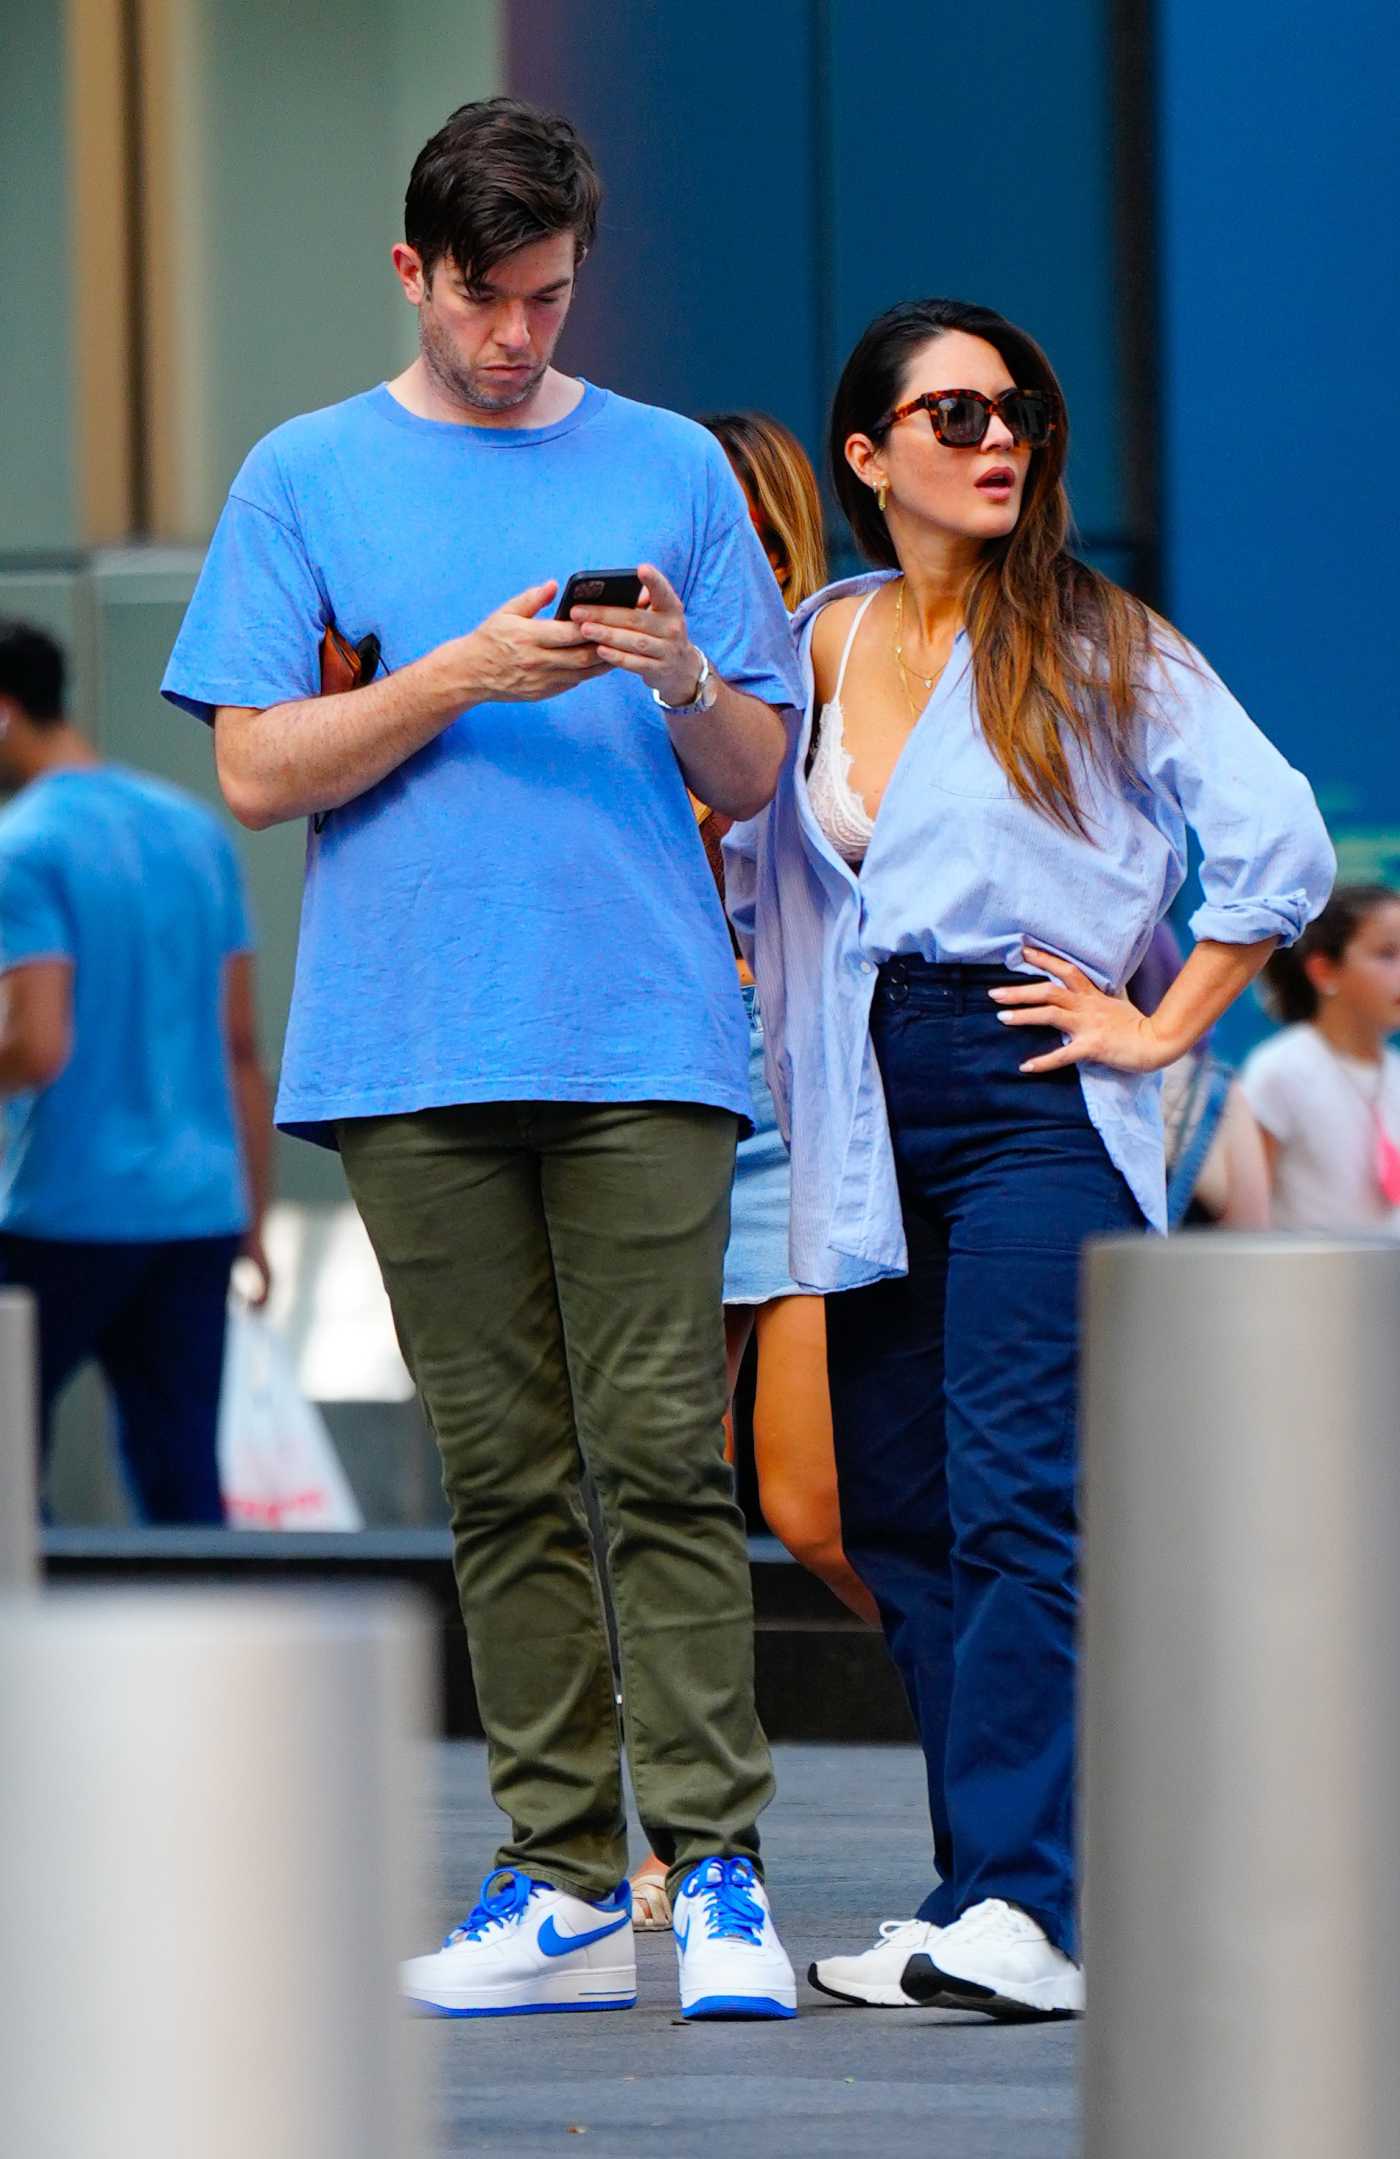 Olivia Munn in a Blue Shirt Was Seen Out with John Mulaney in New York 08/04/2022